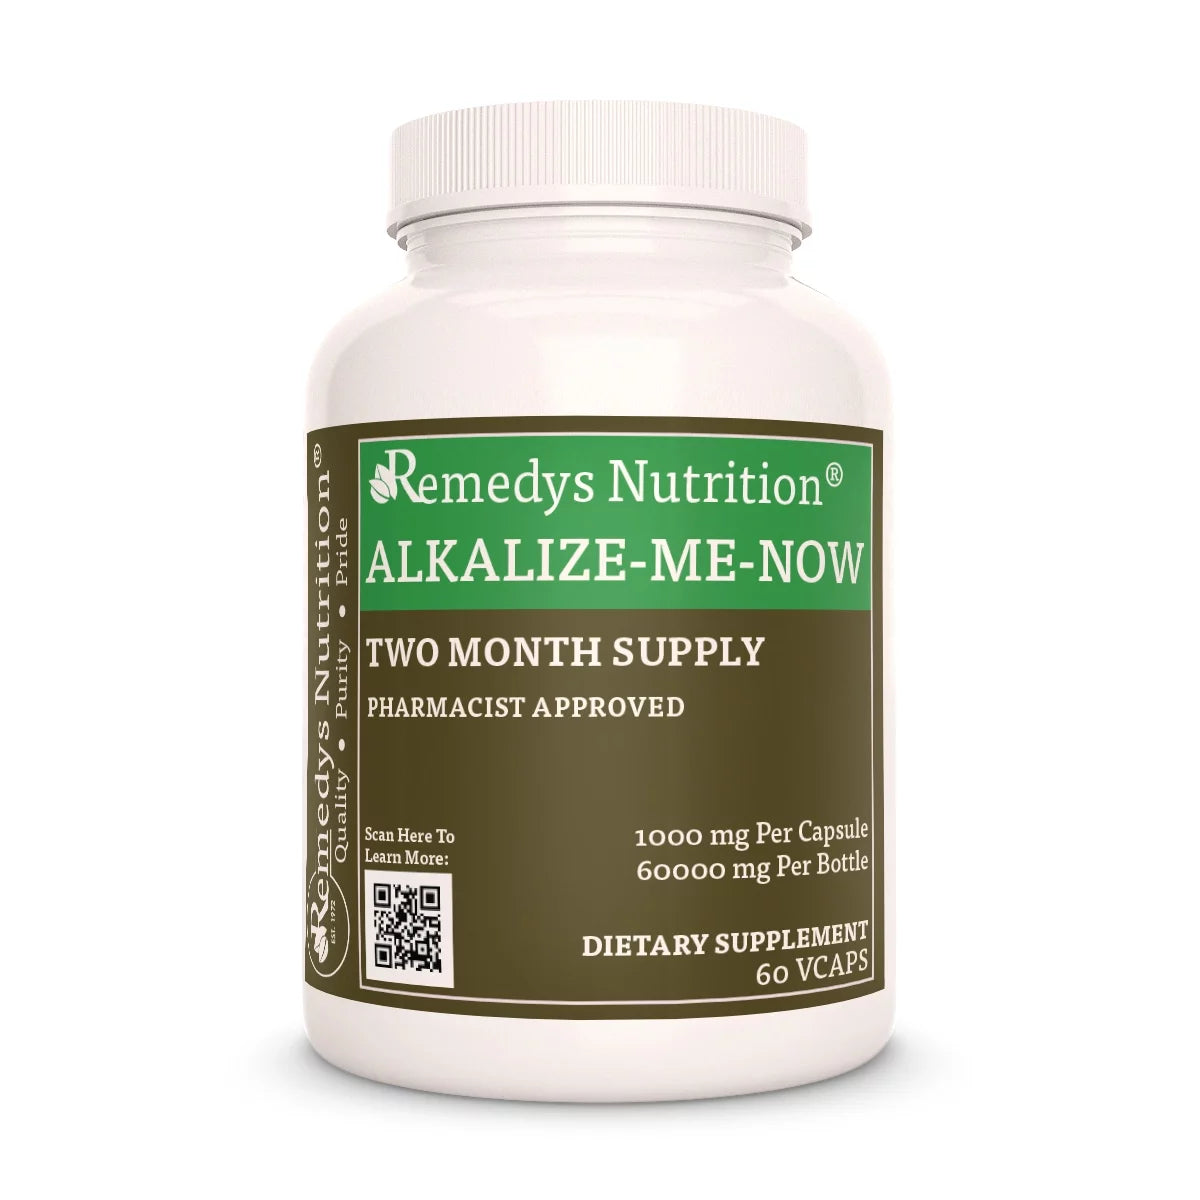 Image of Remedy's Nutrition® Alkalize-Me-Now™ Capsules Supplement front bottle. Made in USA. Sodium Hydrogen Carbonate.